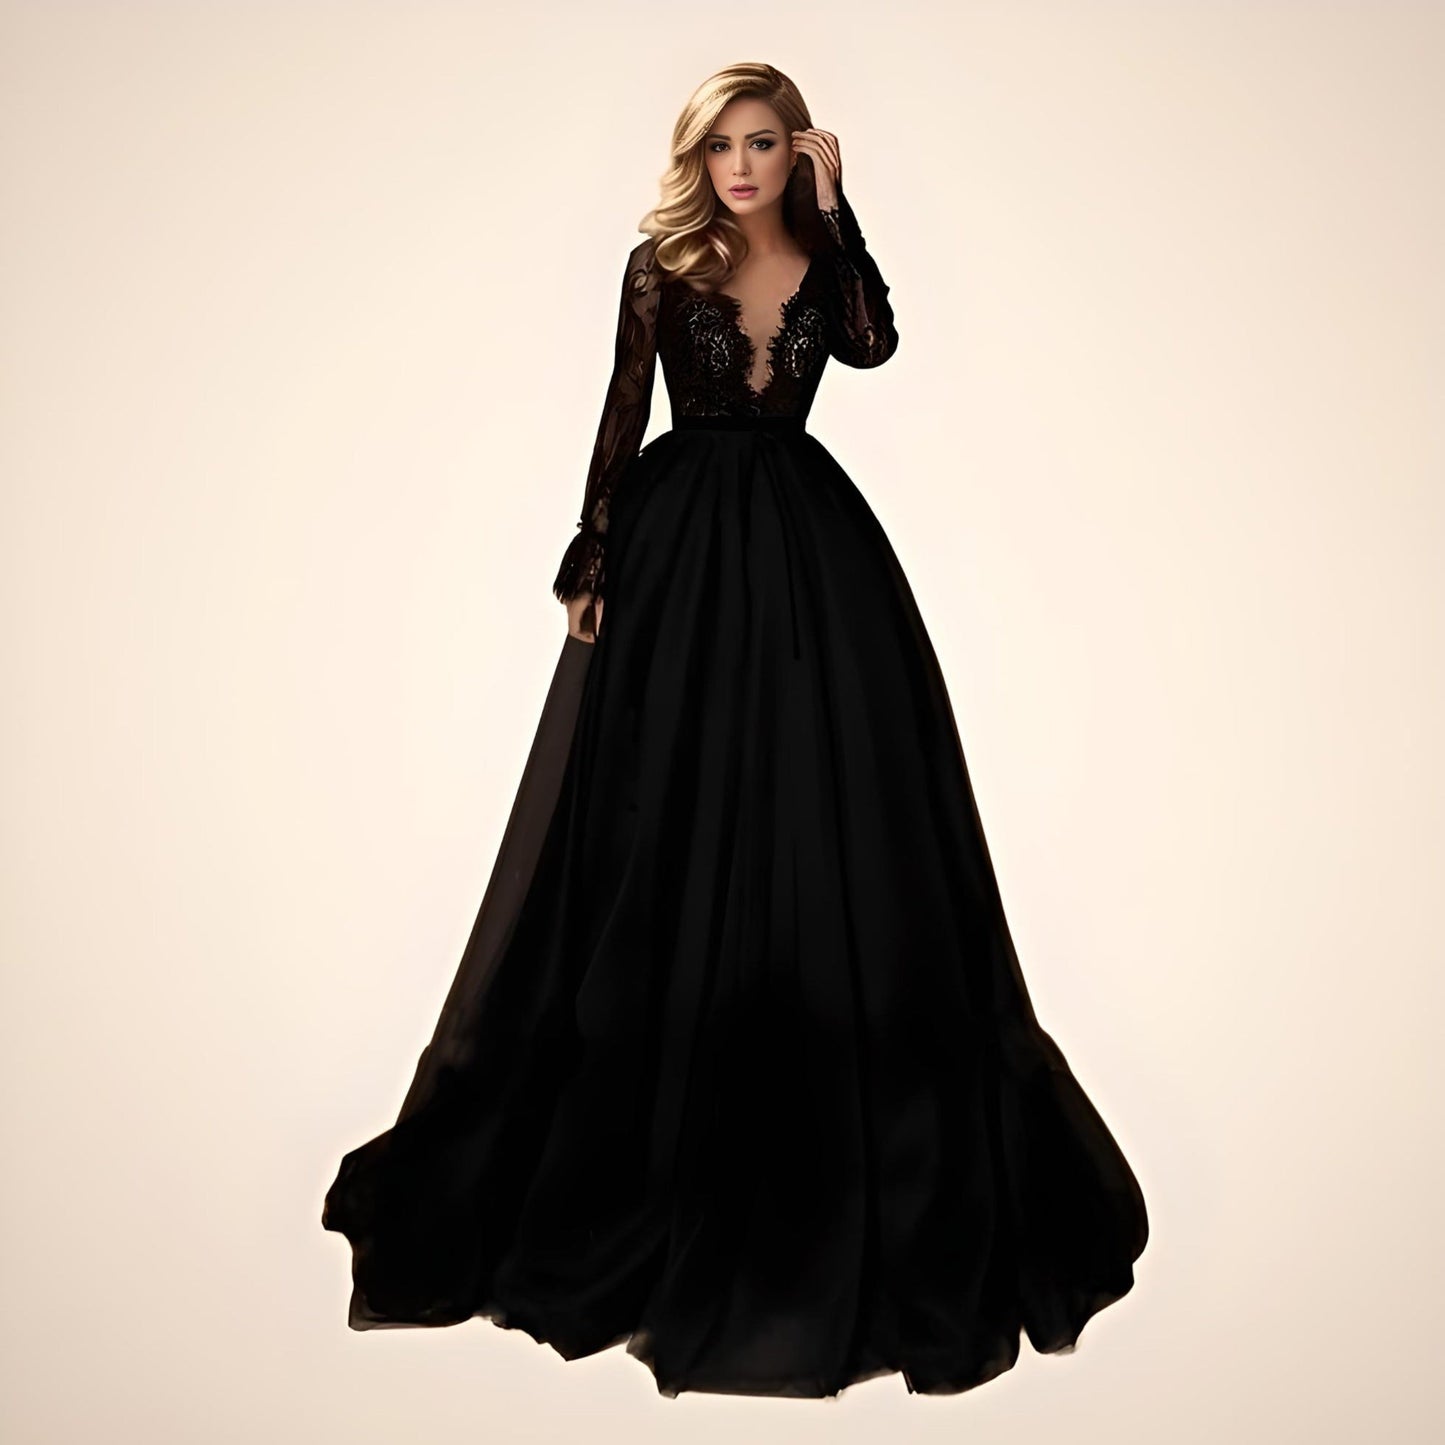 MIKAELA Formal Couture Dress